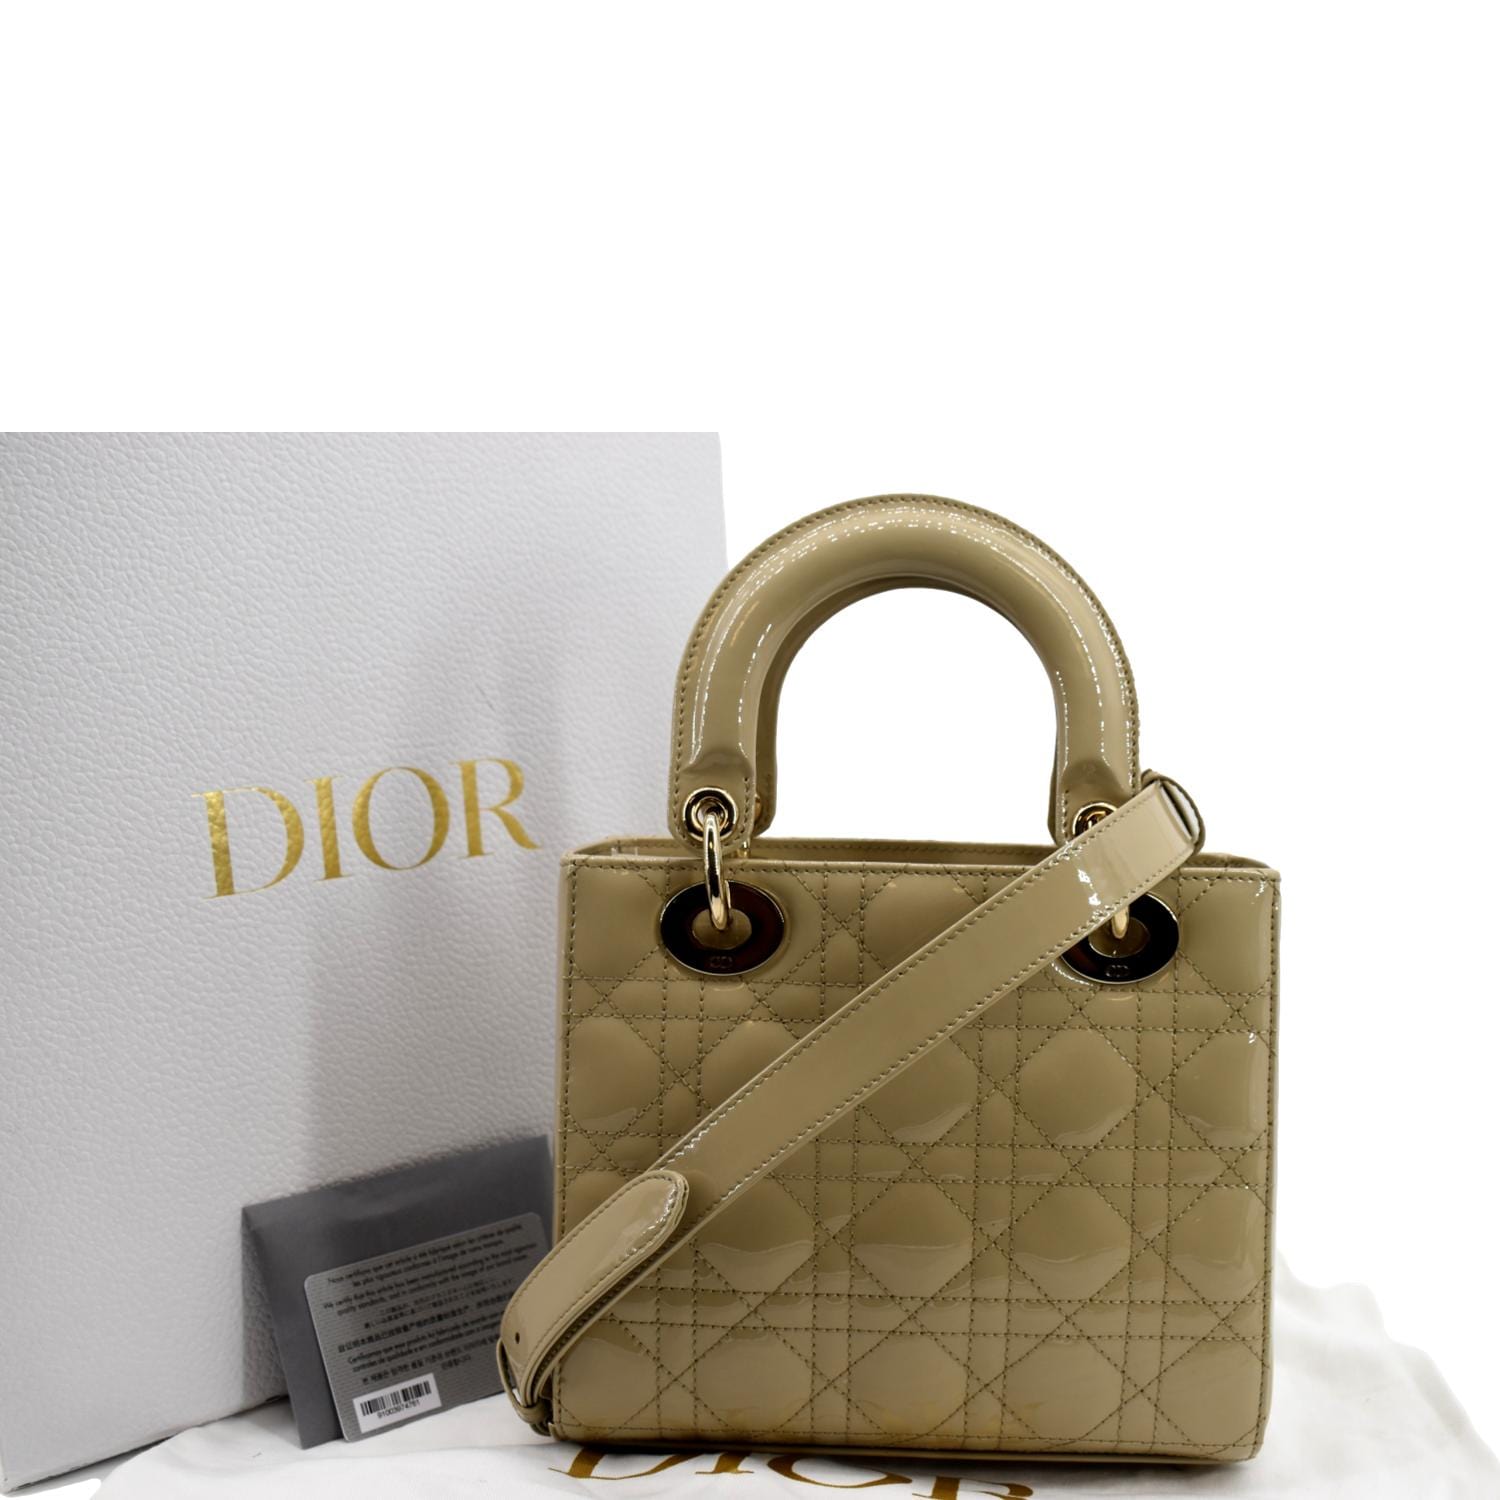 Christian Dior Small Lady Dior bag in beige leather wi  Drouotcom